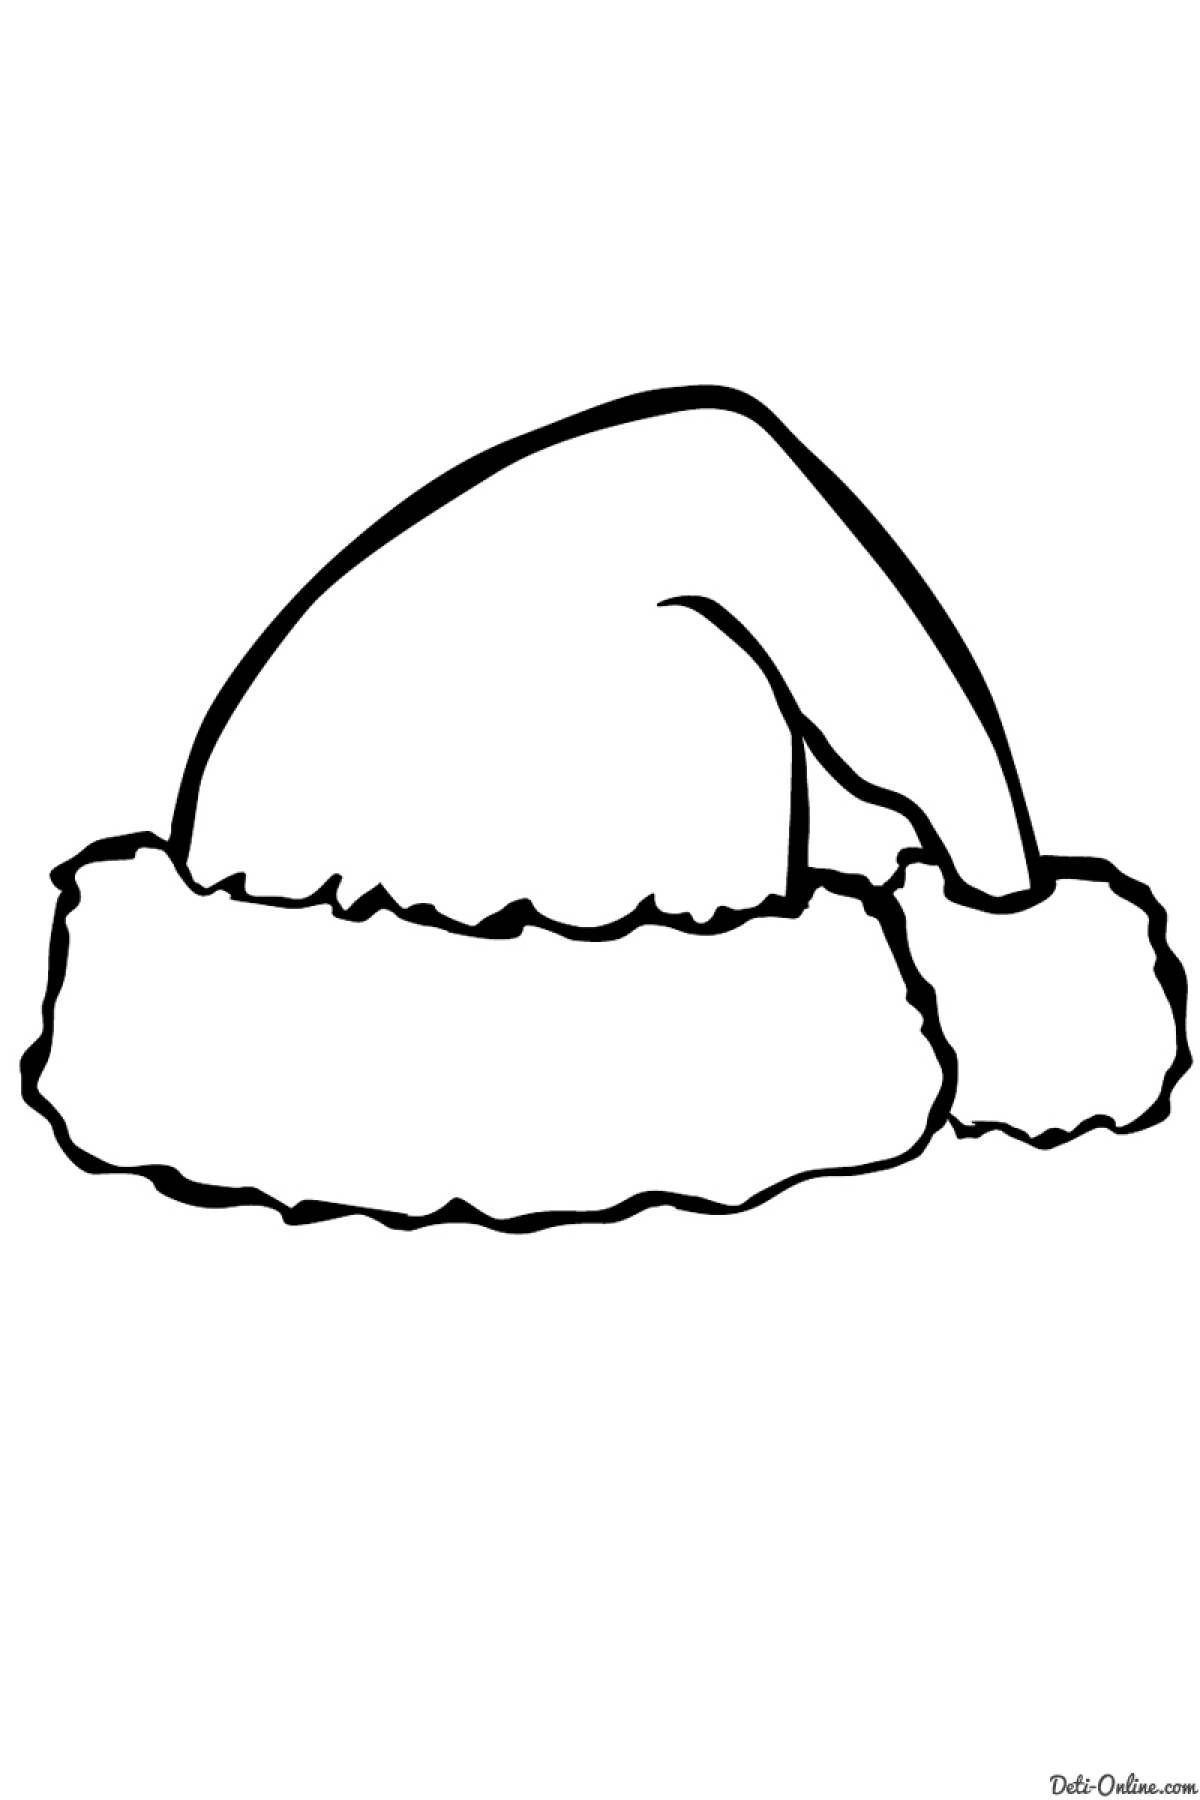 Red hat coloring page